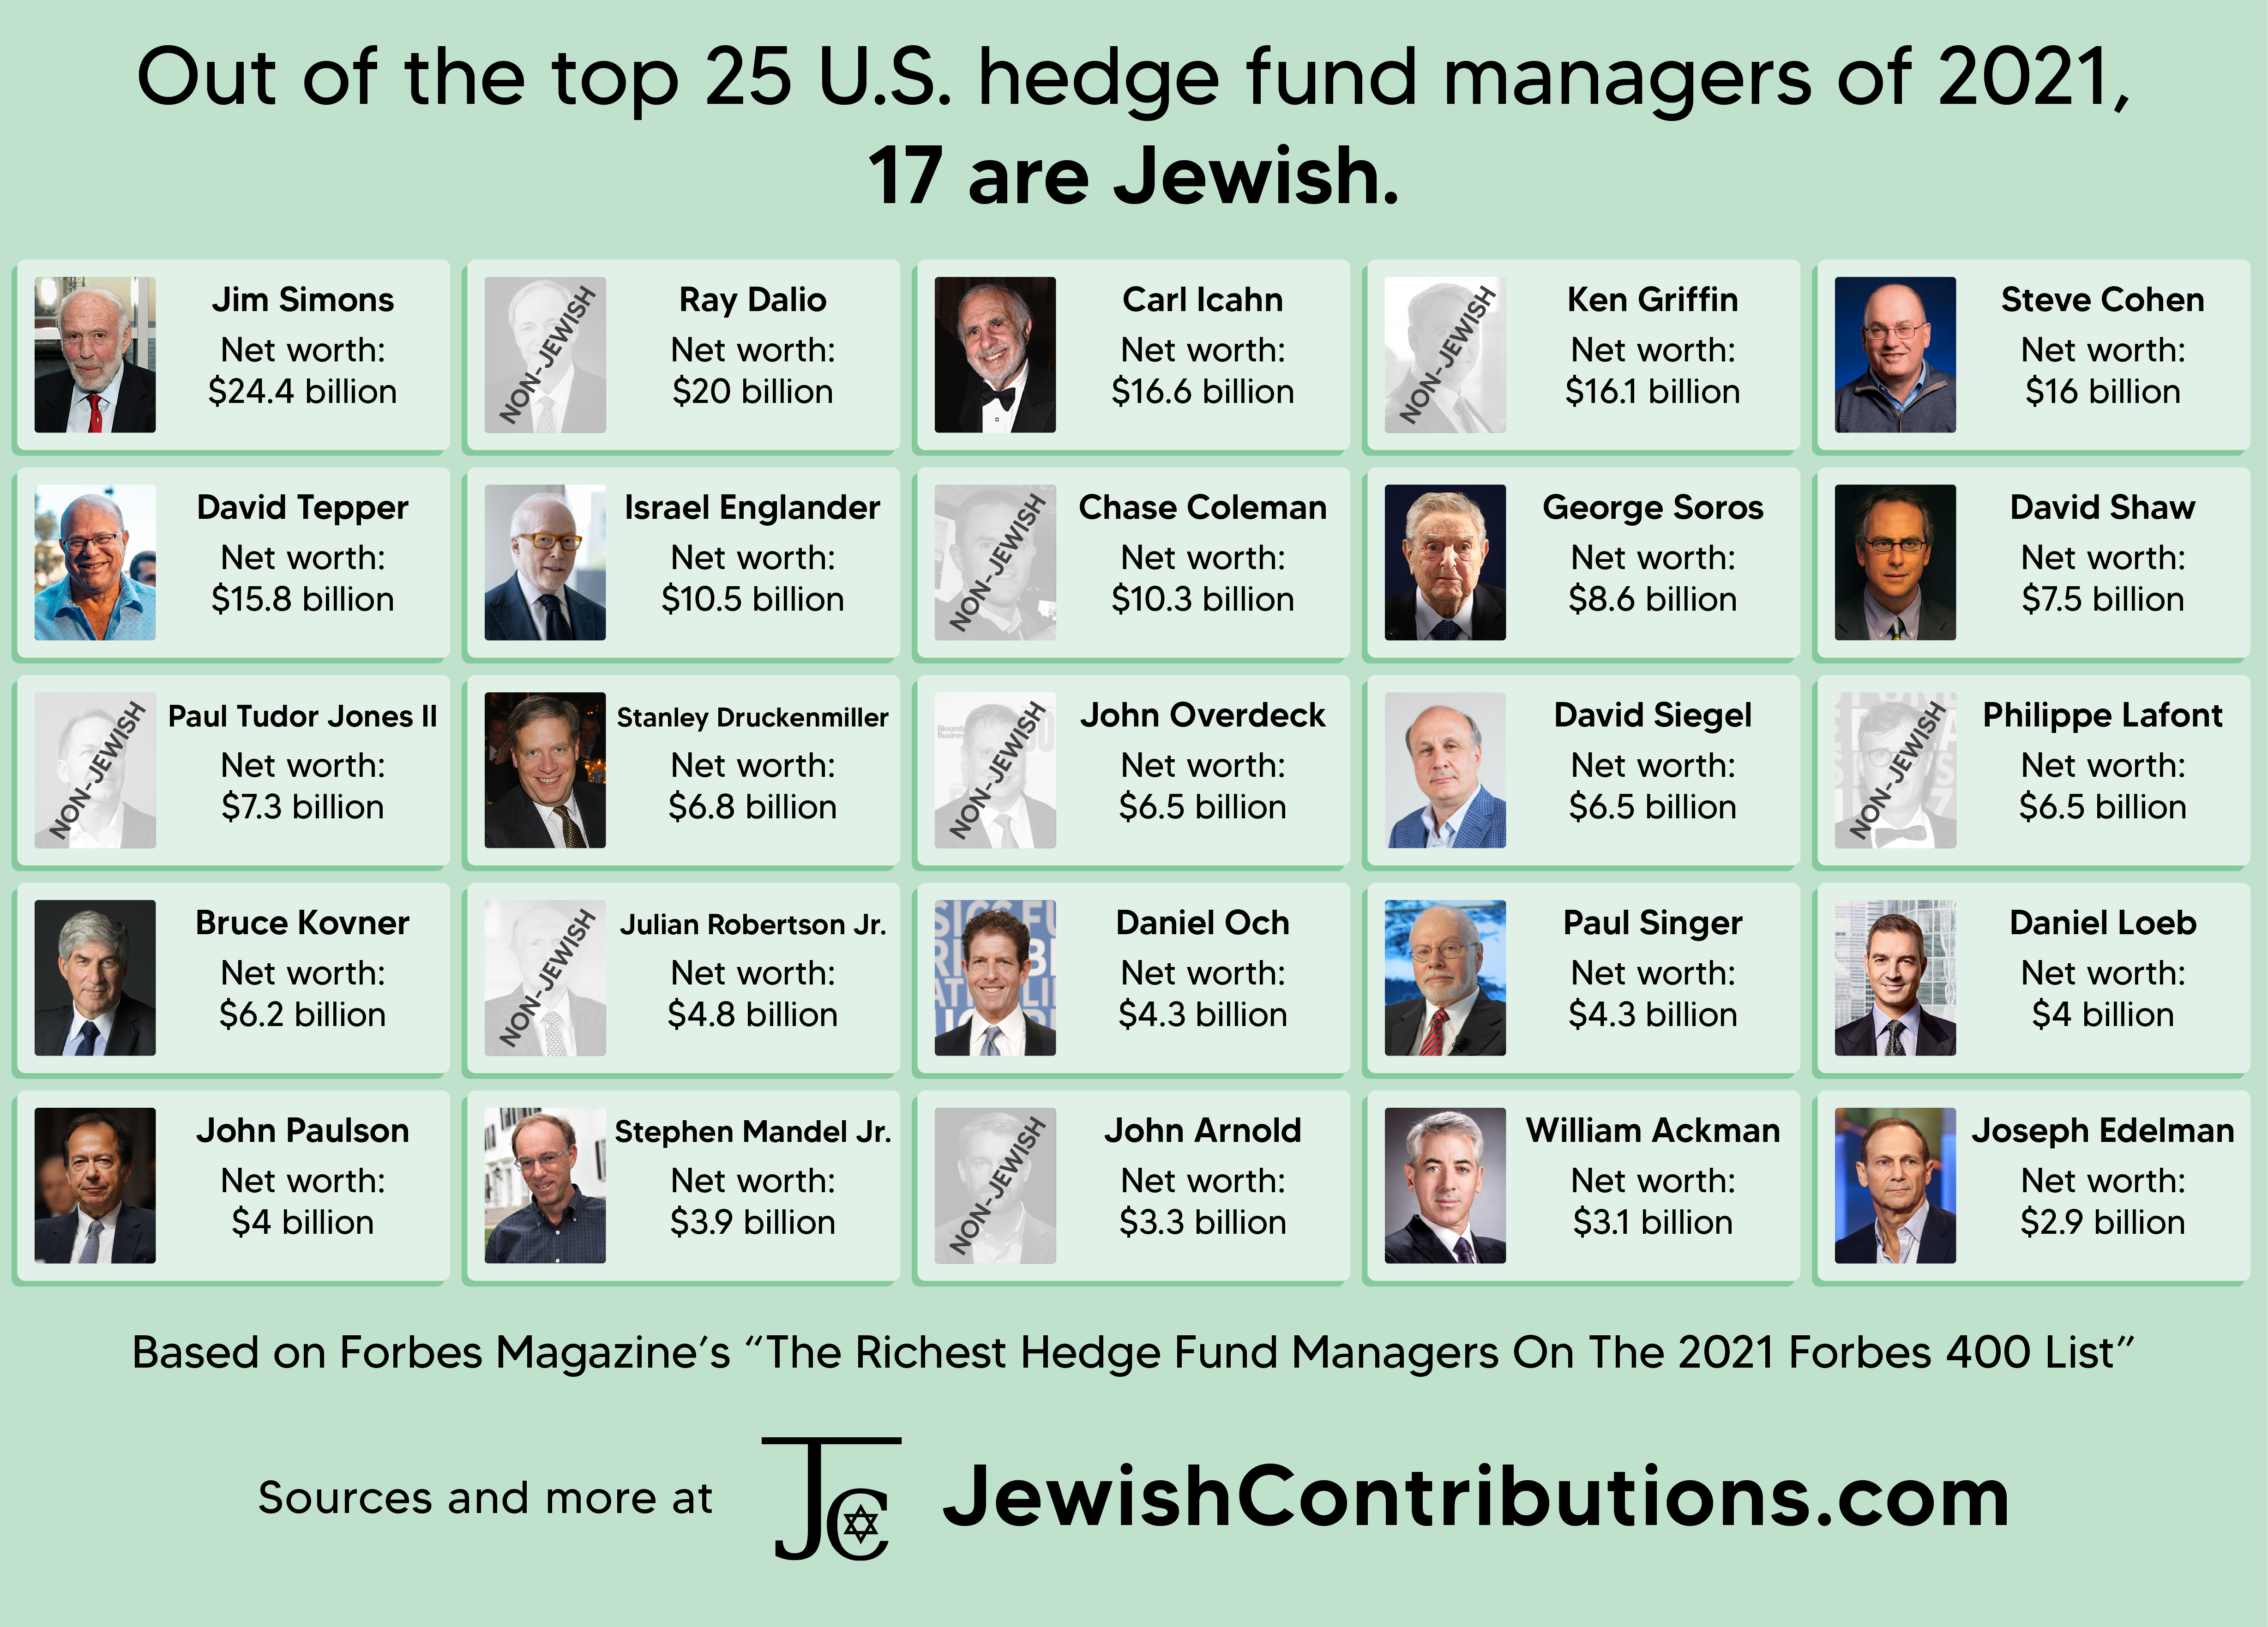 Out of the top 25 U.S. hedge fund managers of 2021, 17 are Jewish.